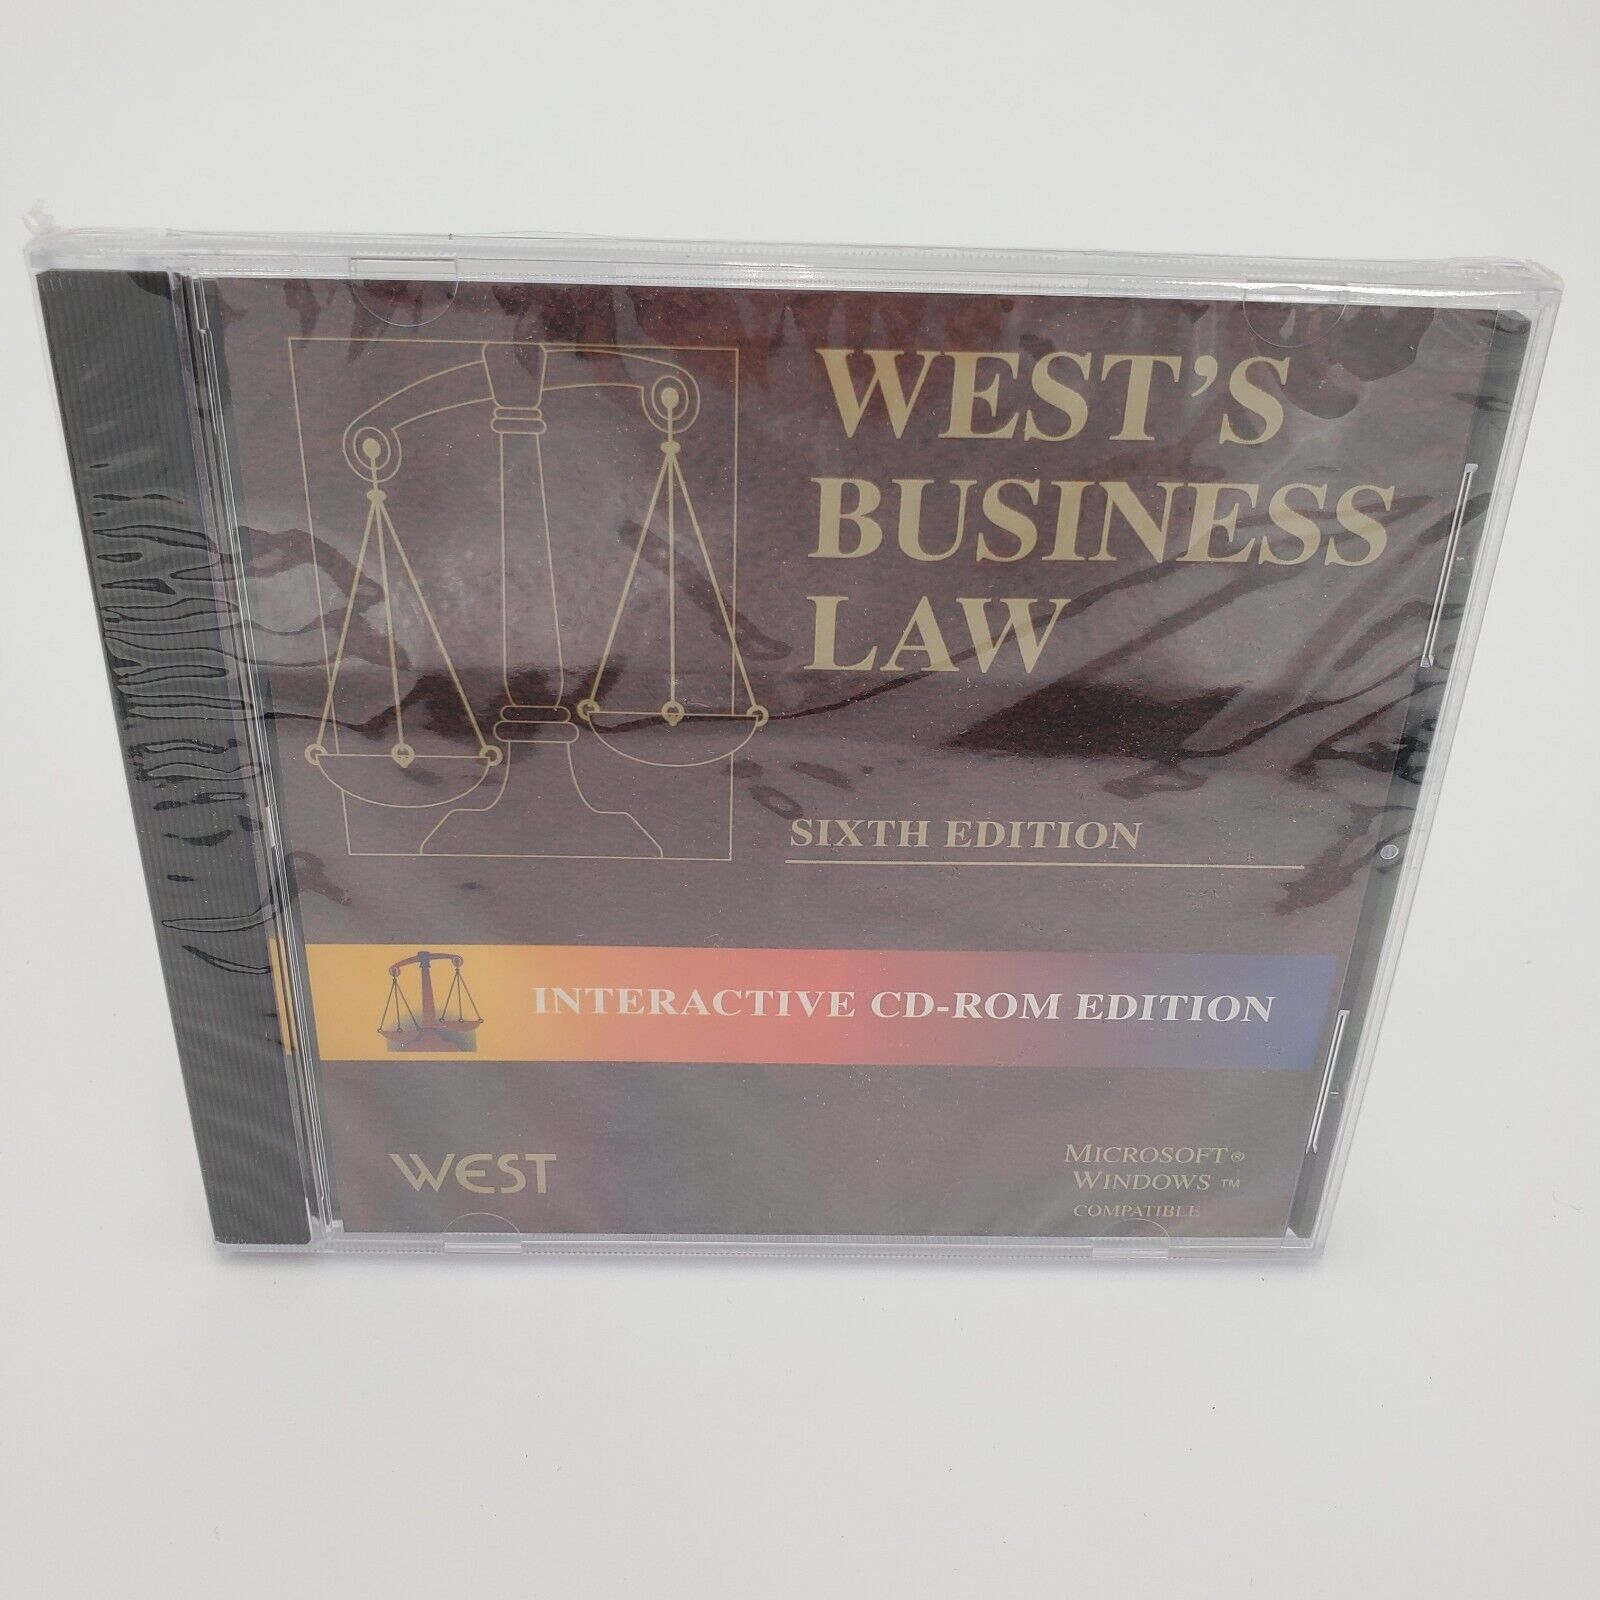 West’s Business Law Sixth Edition Interactive CD-ROM Edition Windows PC 1995